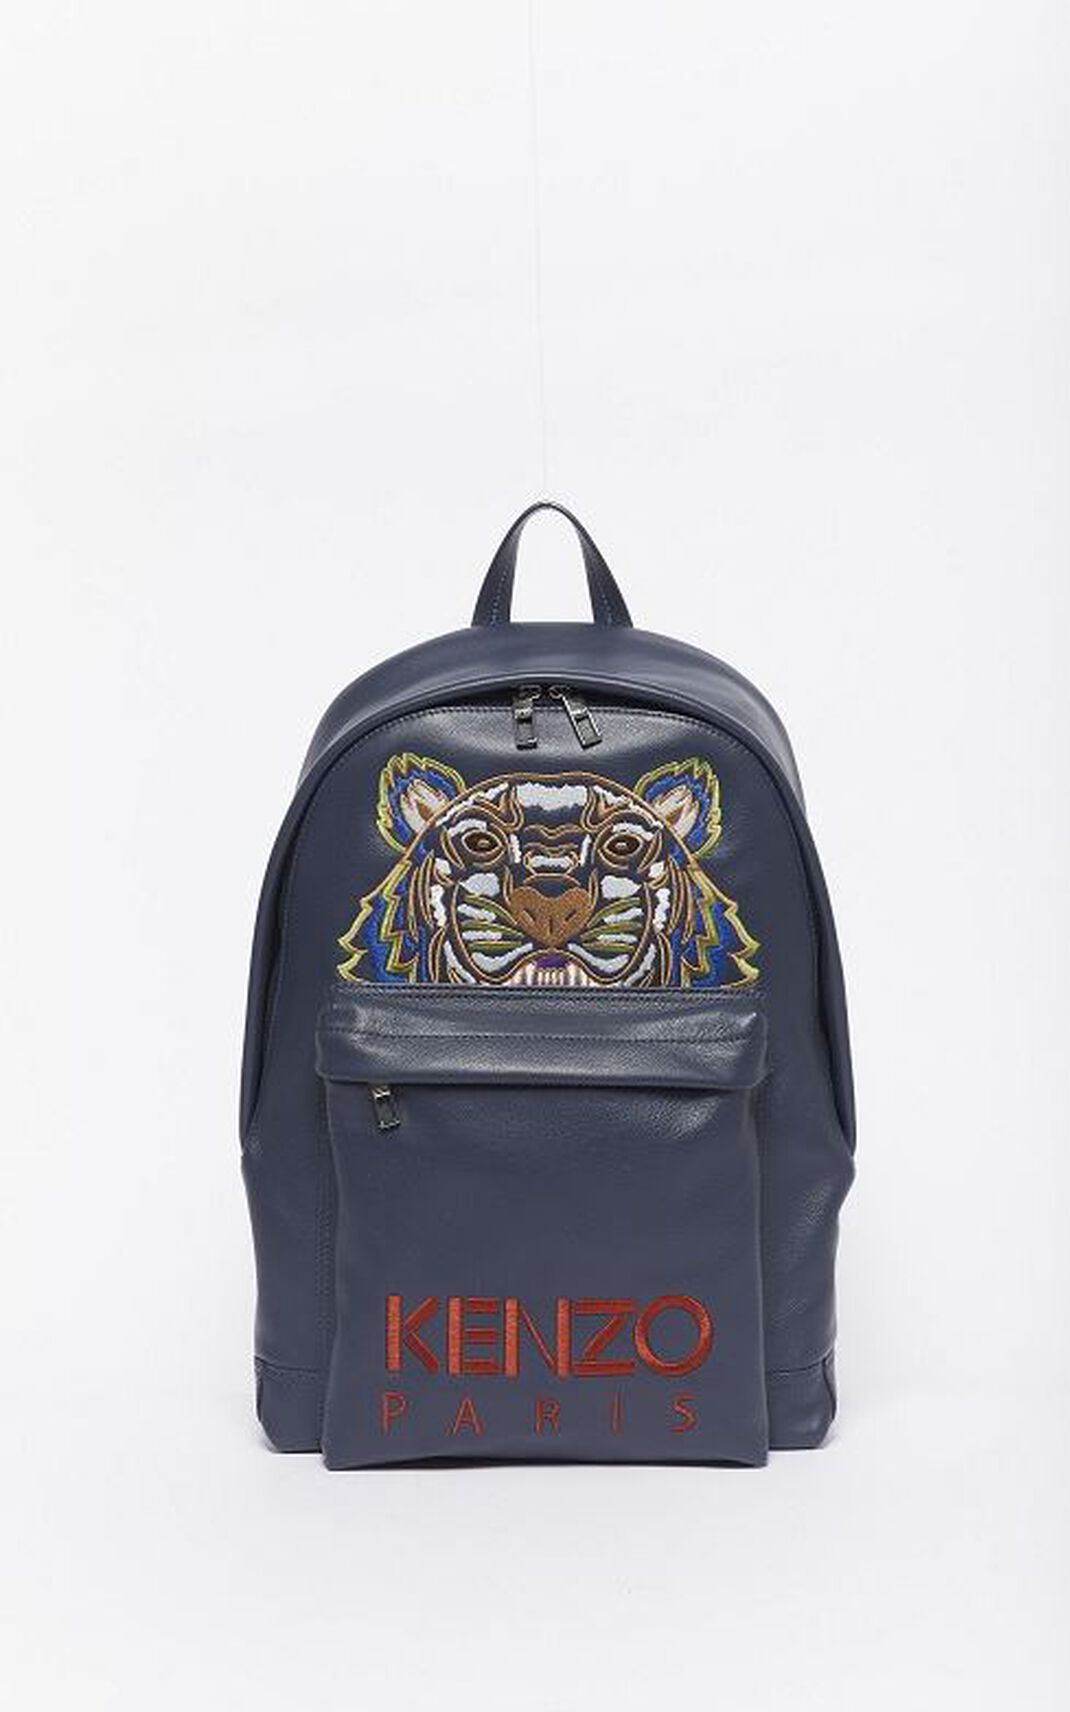 Kenzo Tiger leather Backpack Navy Blue For Womens 4758HWBYL